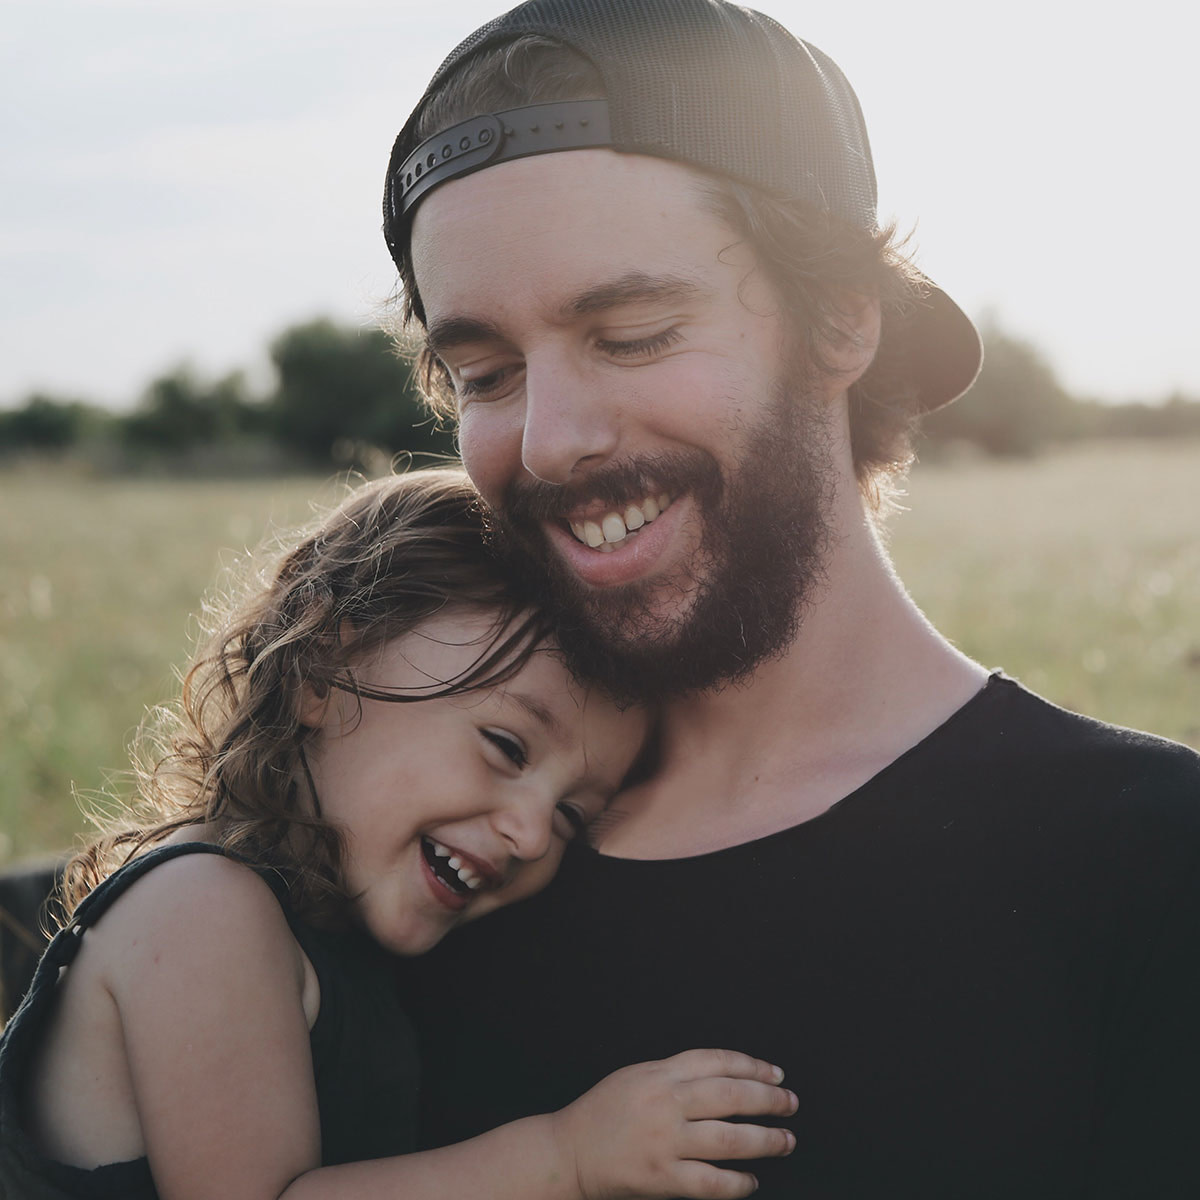 Father holding daughter in his arms. Both are smiling and the sun is shining on the foliage in the background.